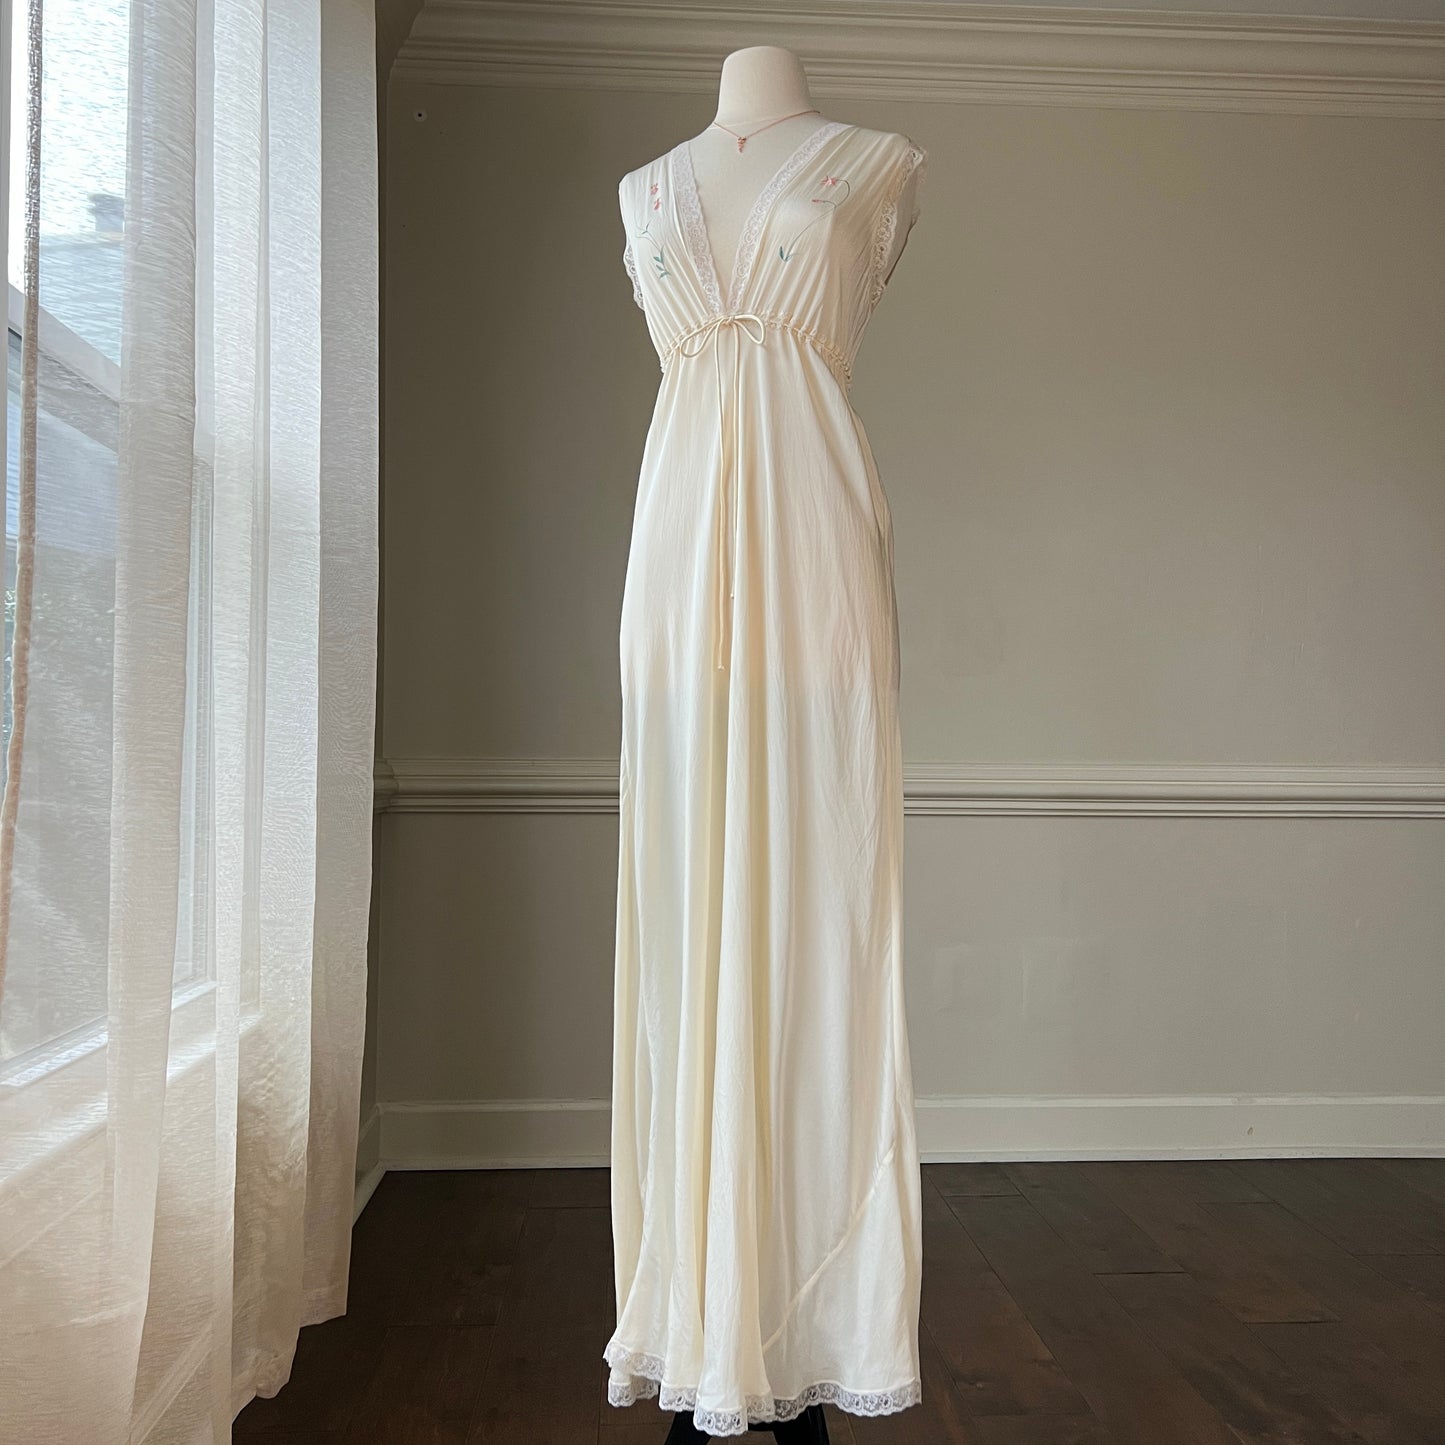 Christian Dior’s ethereal sheer maxi dress in vintage creamy